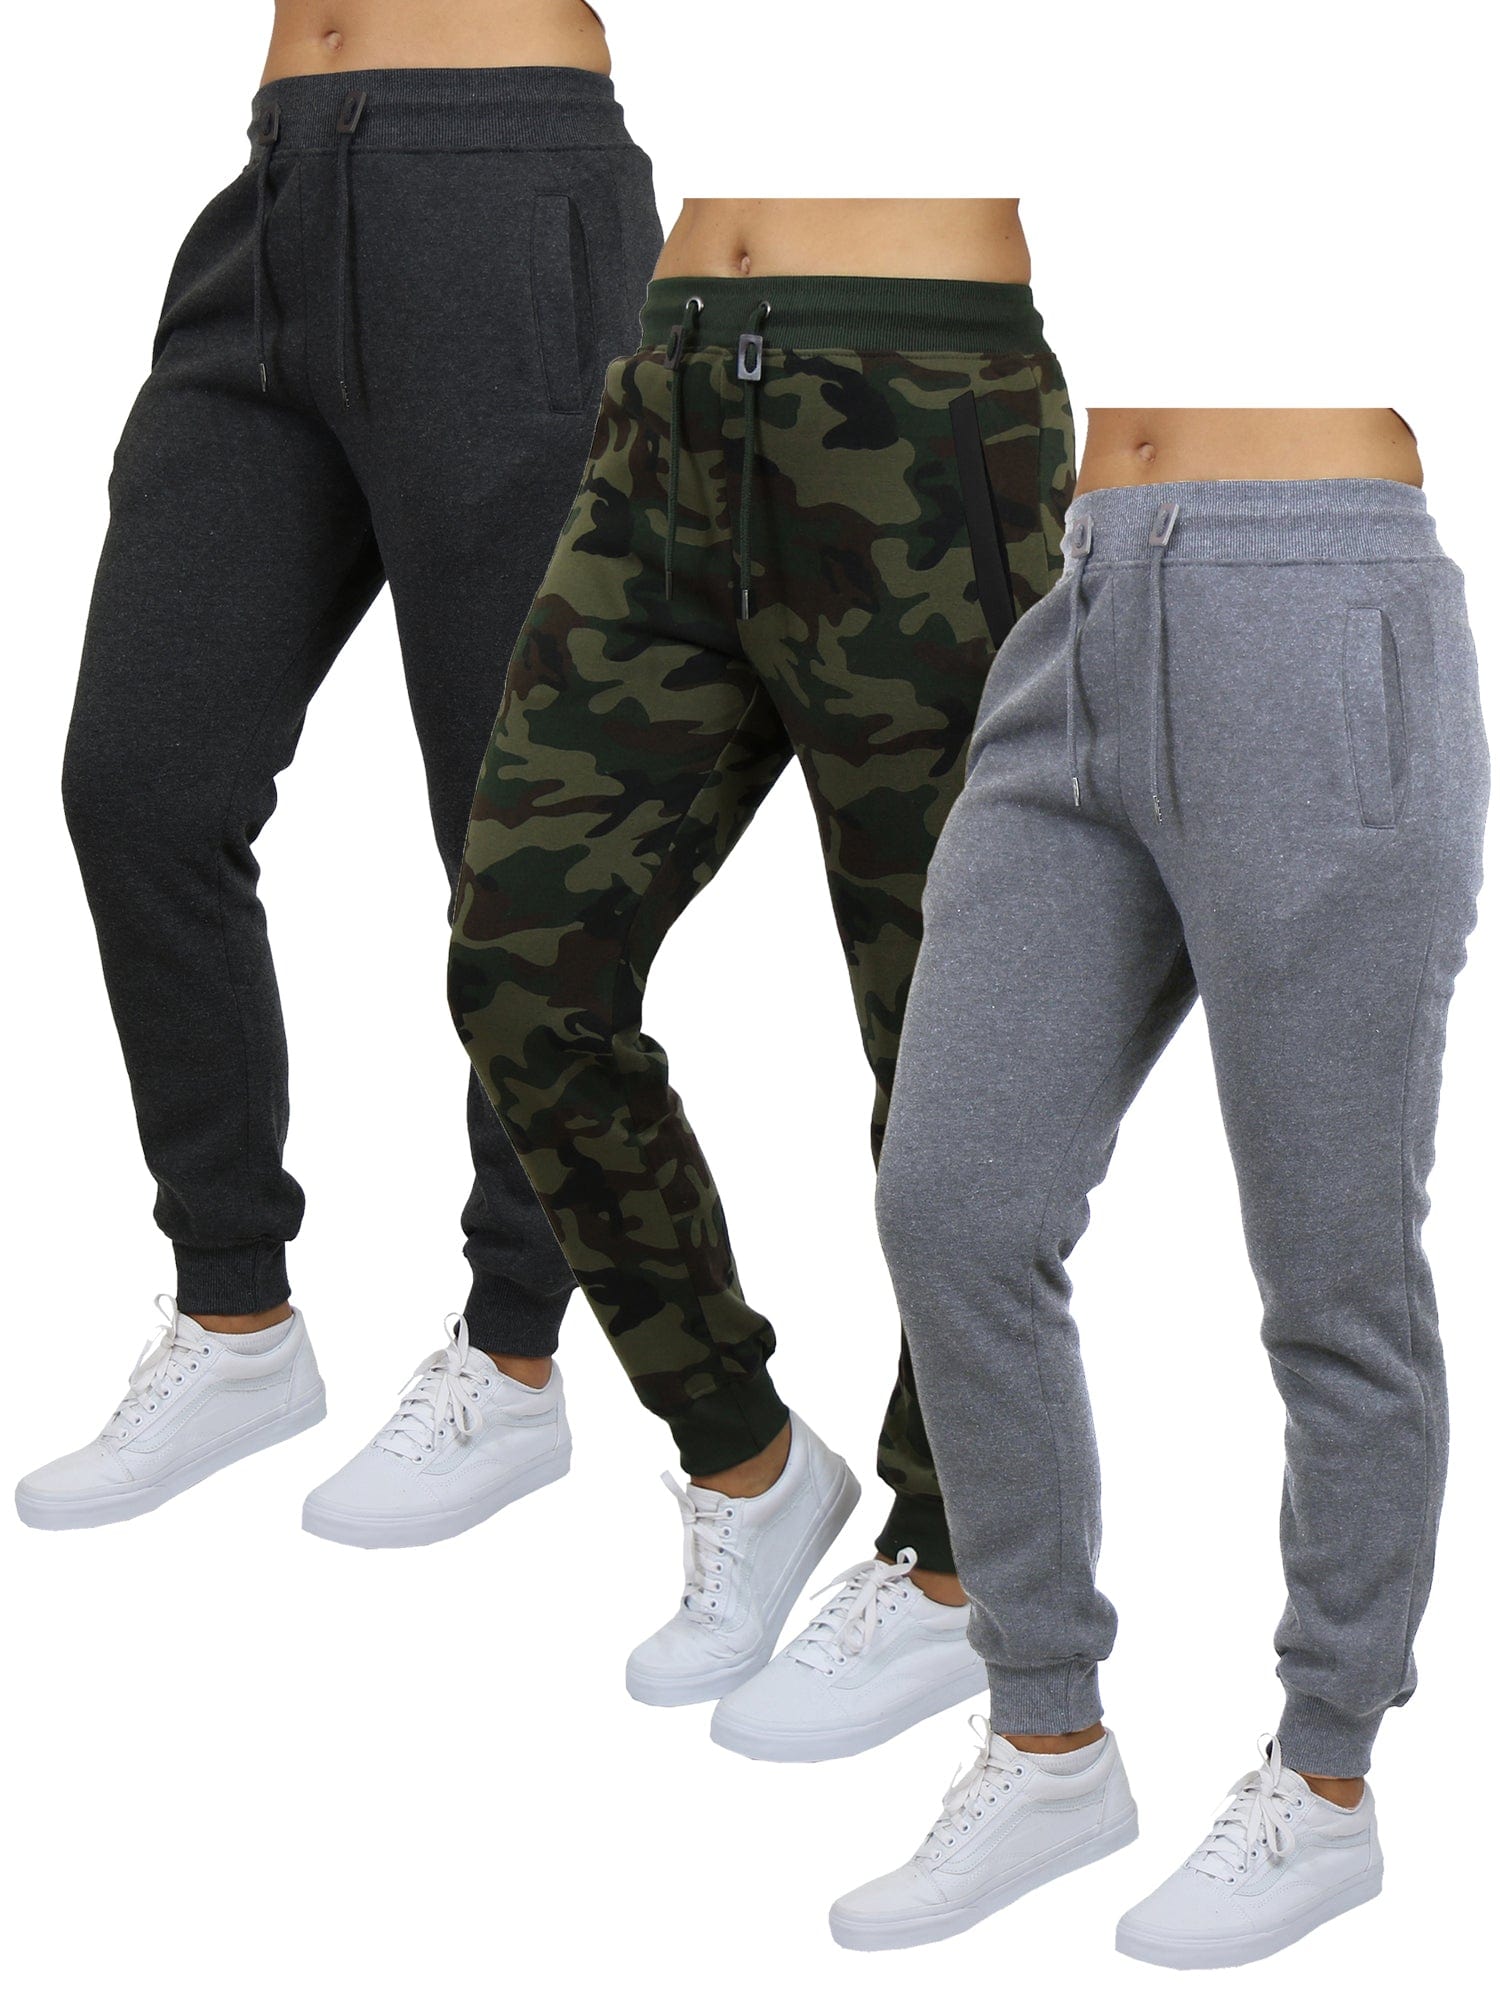 3-Pack Women's Fleece & French Terry Oversized Loose-Fit Jogger Sweatpants (S-2XL) - GalaxybyHarvic